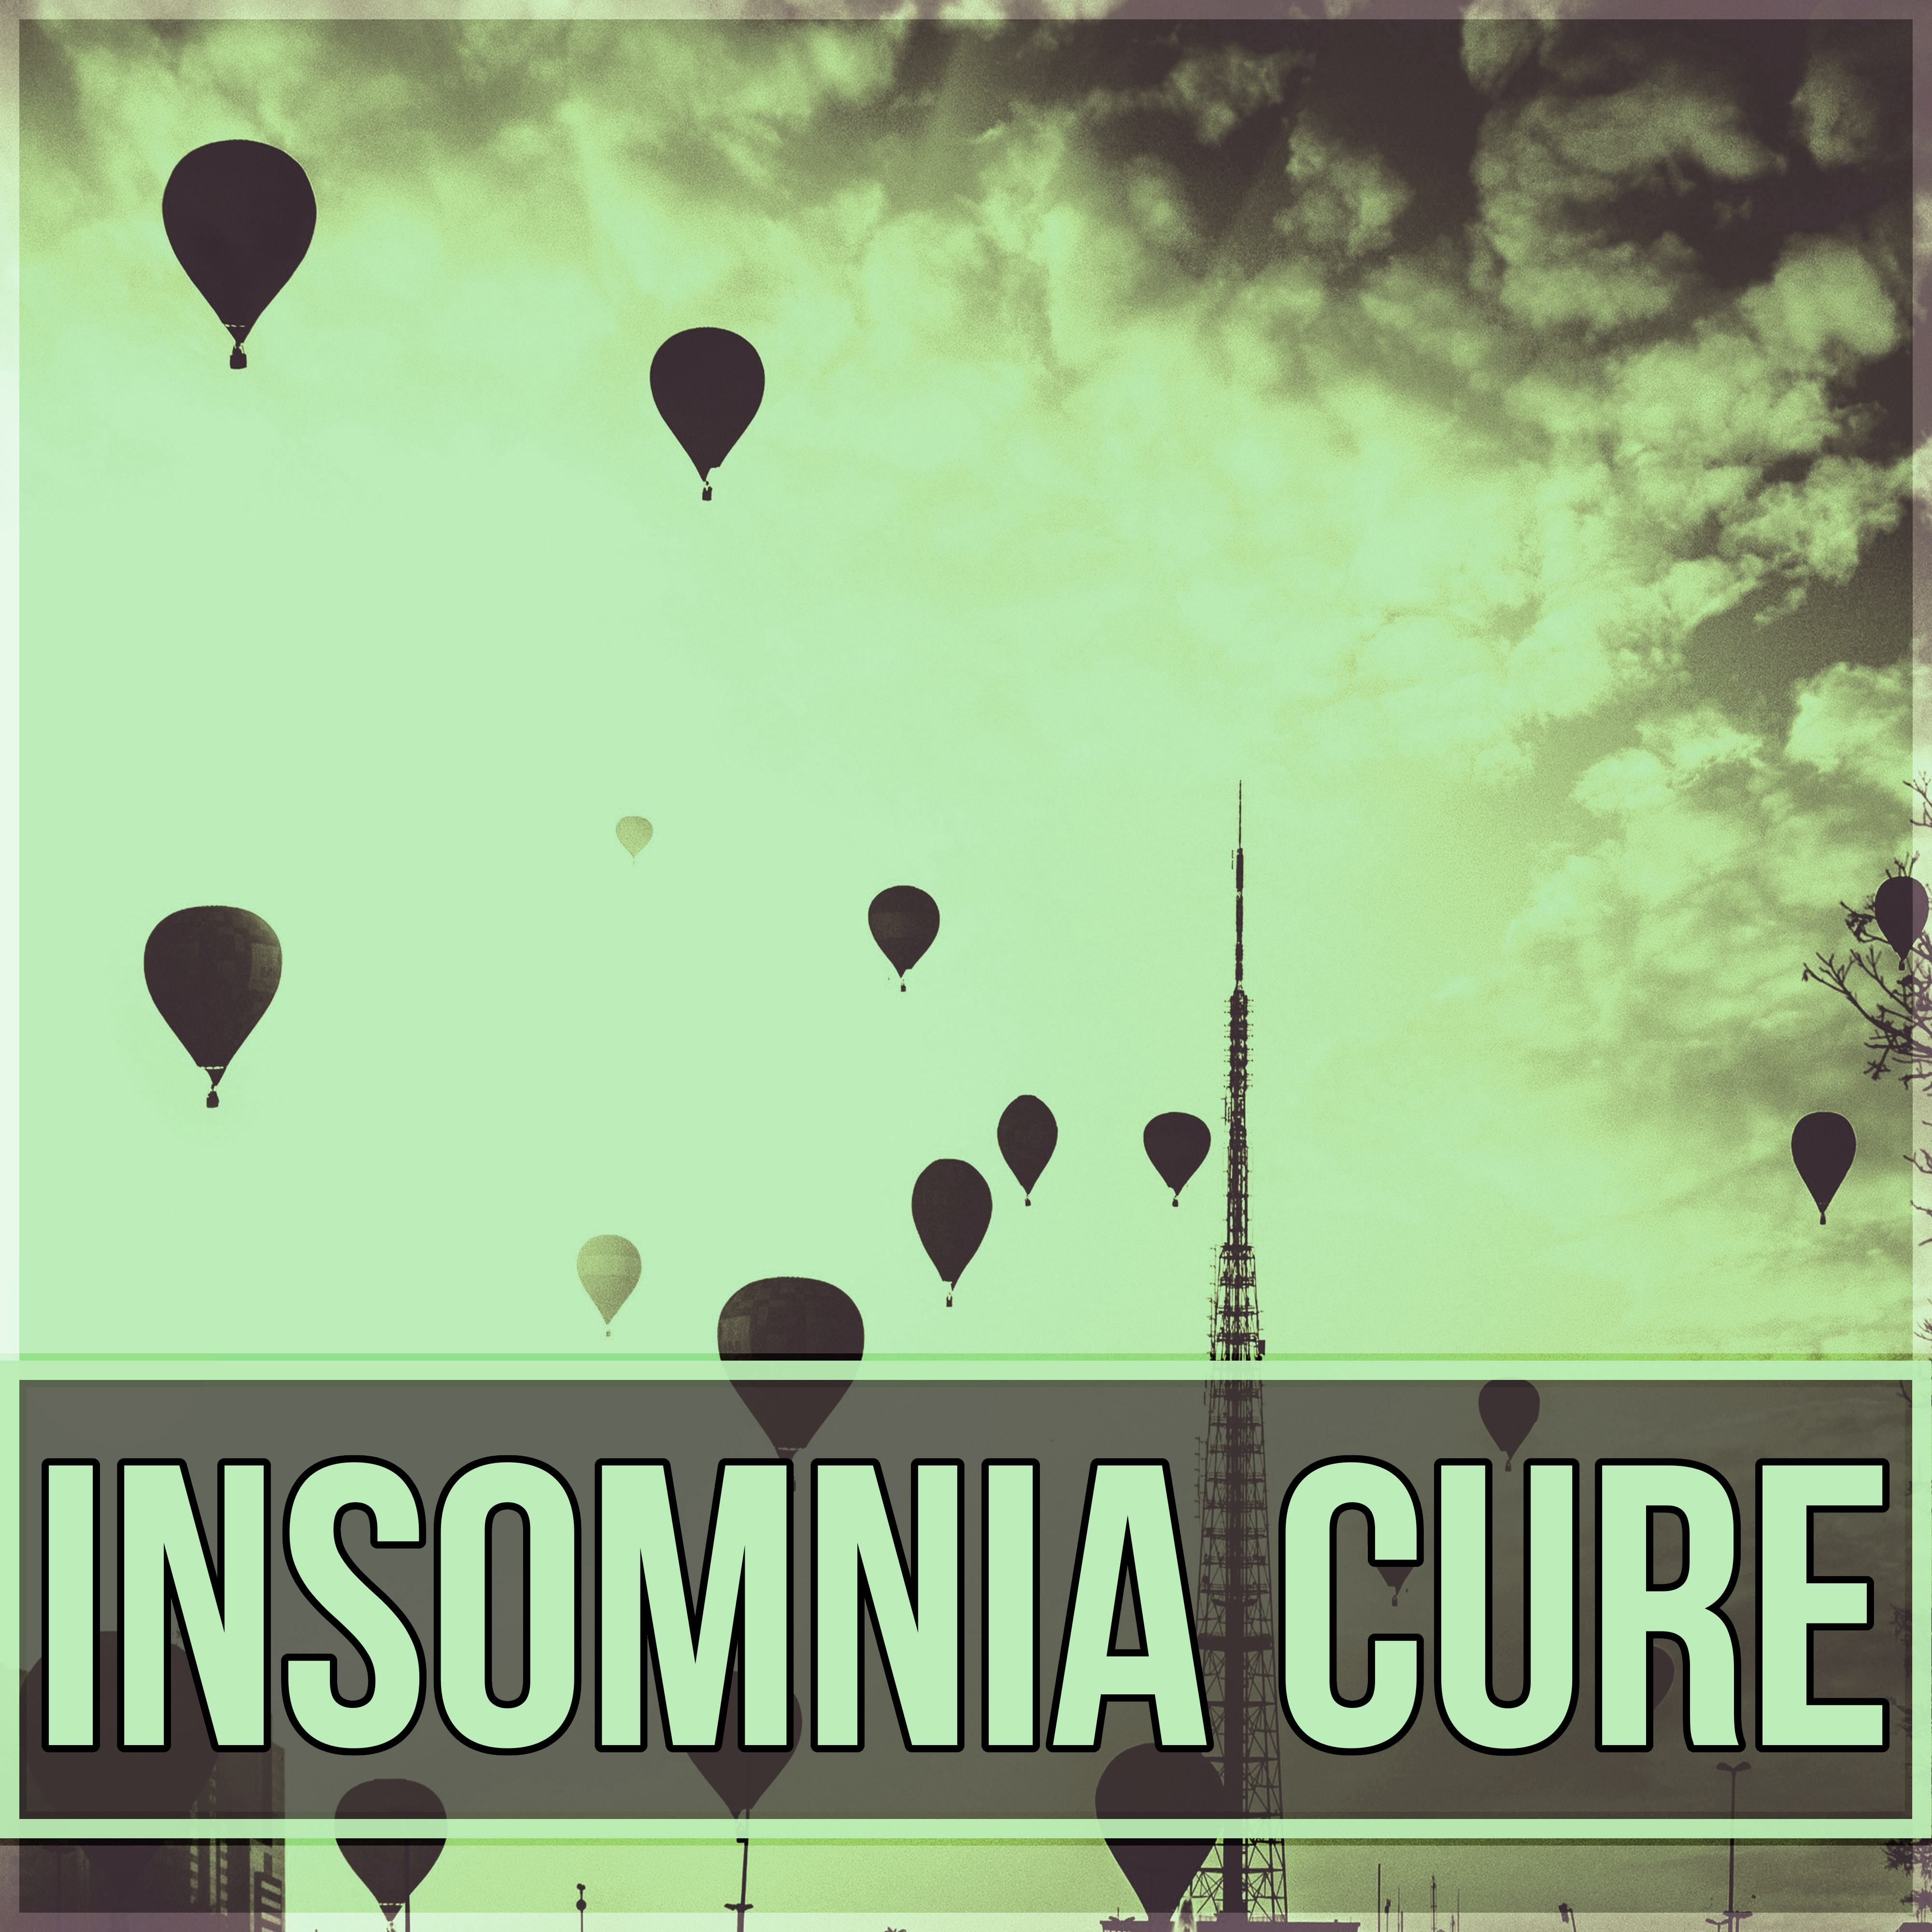 Insomnia Cure - Sleep Songs, Waves Sounds, Calming Quiet Nature Sounds, White Noise, Deep Sleep